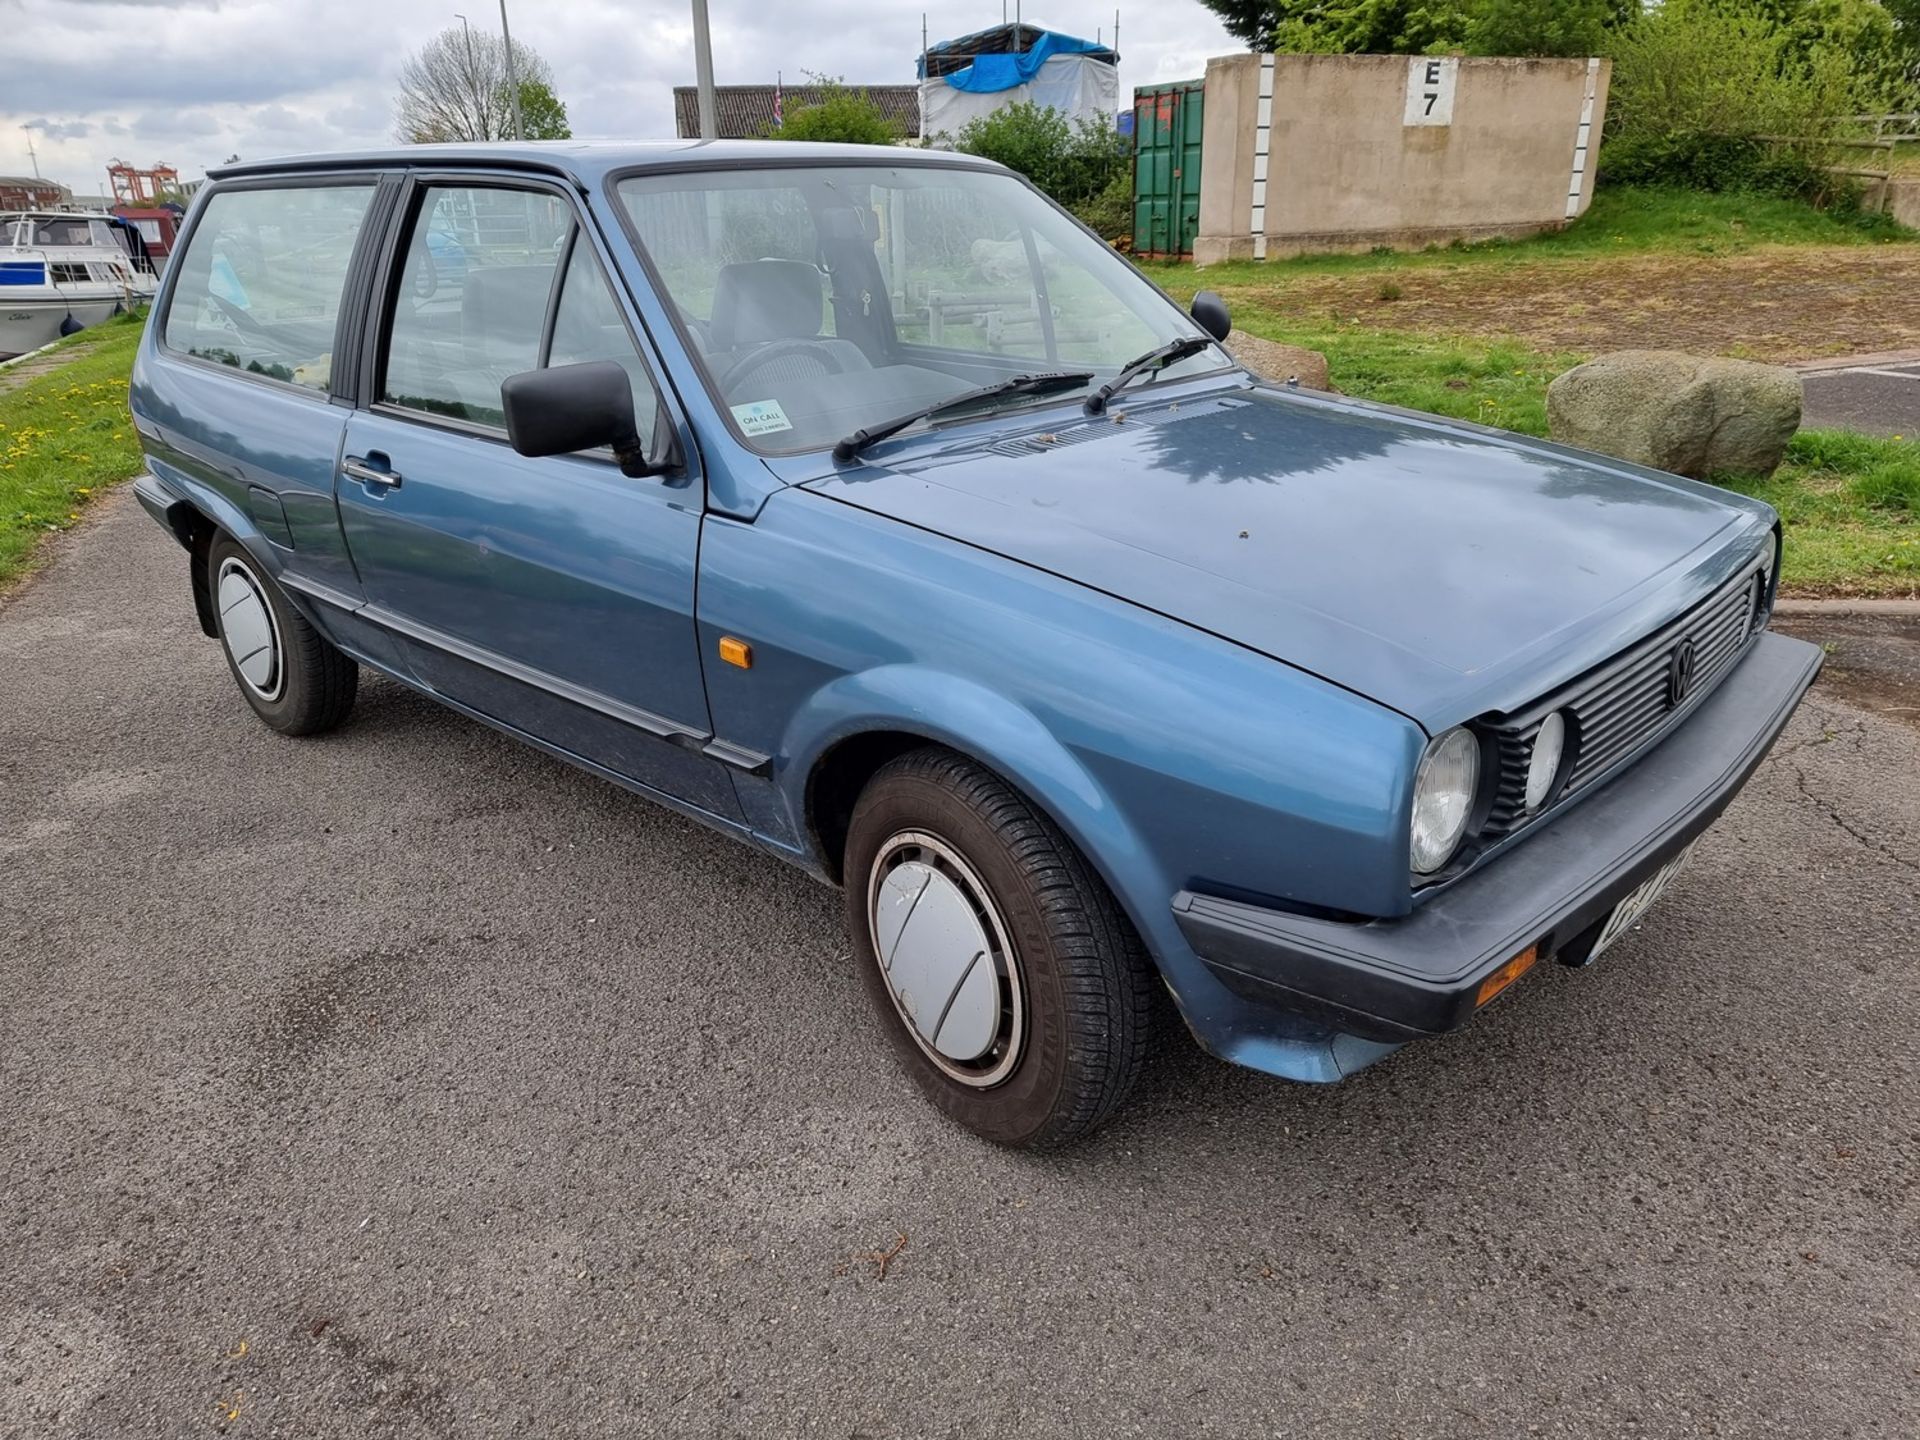 1989 VW Polo Mk2, 1272cc. Registration number G775 MKH. Chassis number WVWZZZ80ZKW168973. Engine